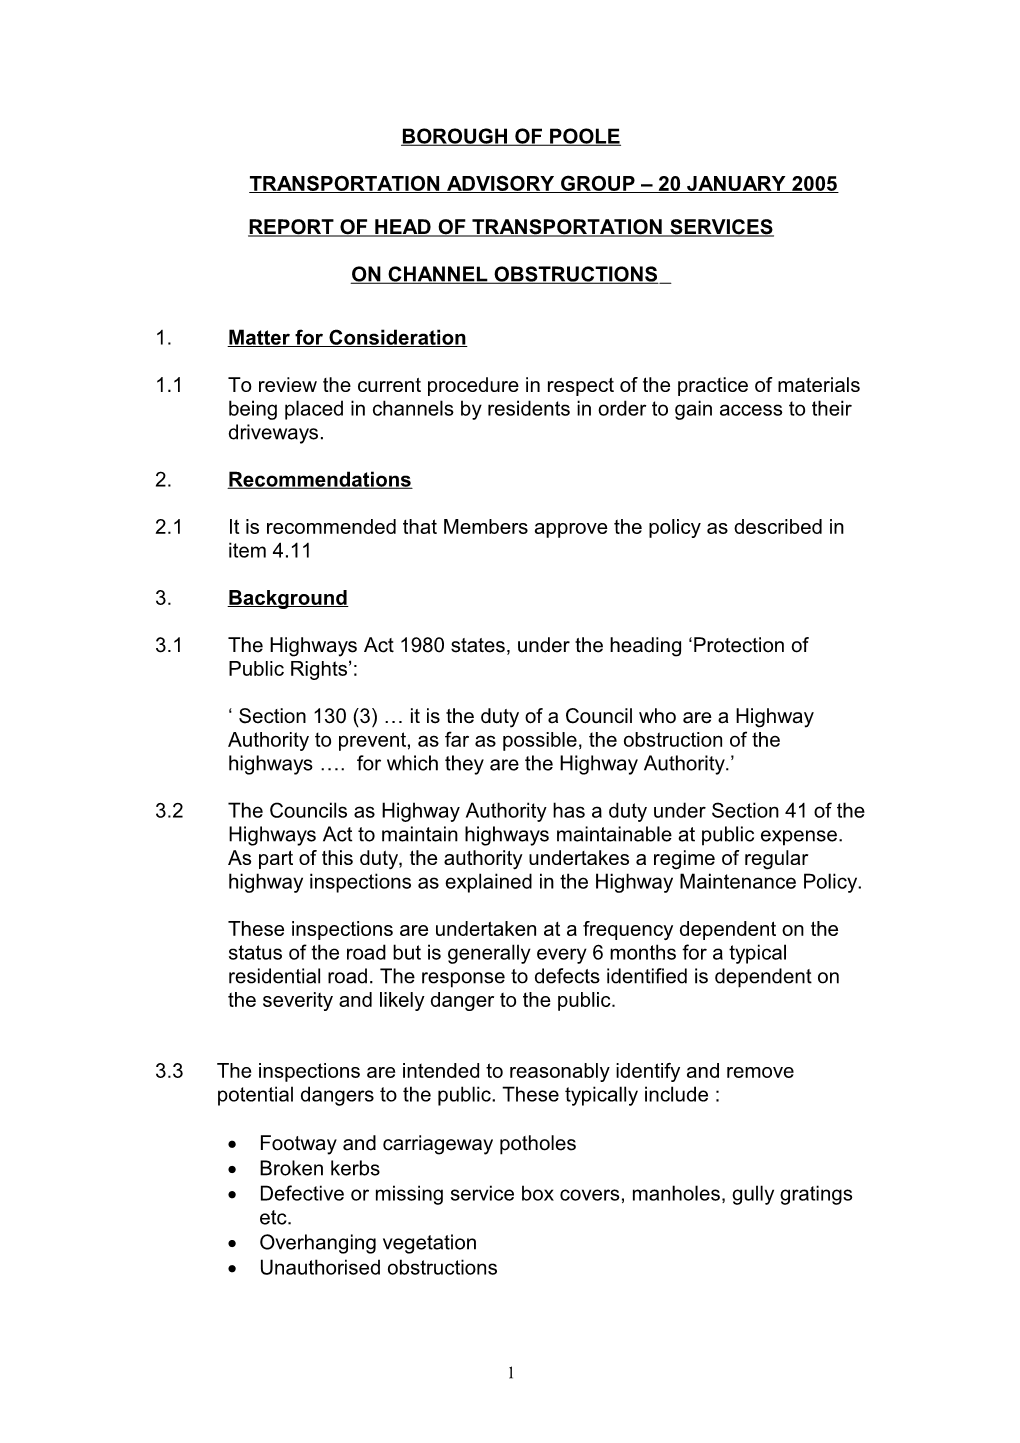 PFD - Councillor Parker - 20 January 2005 - Channel Obstructions - Report